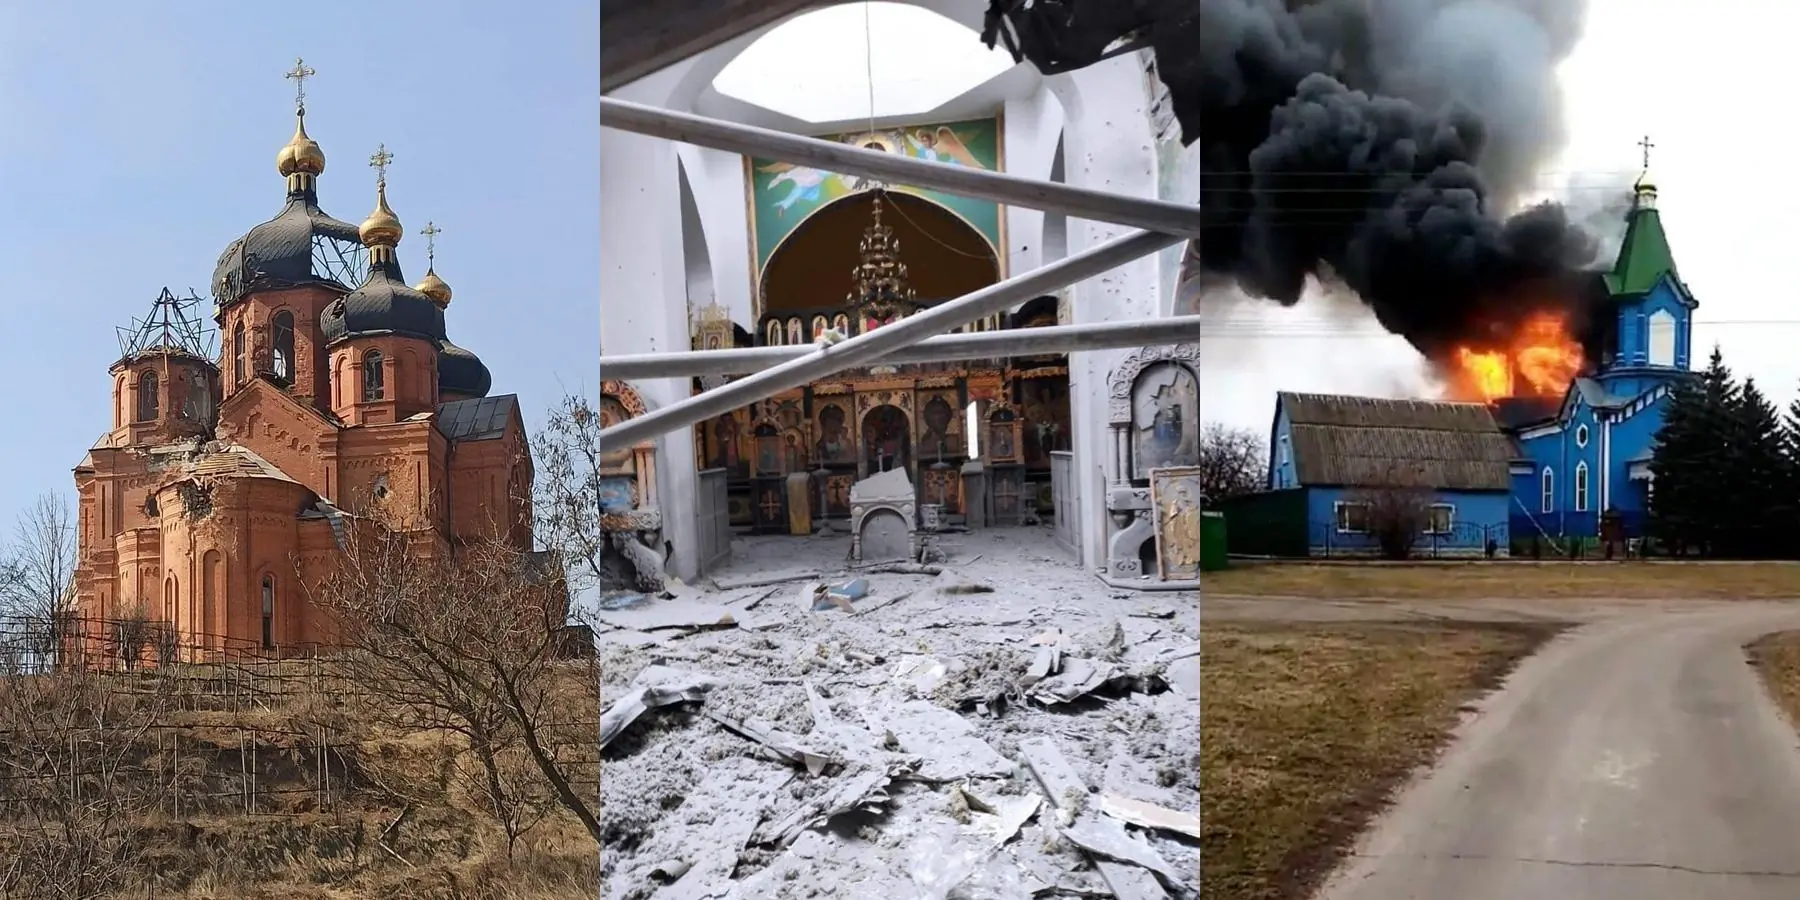 Churches in Ukraine destroyed by Russian attacks (from left): Cathedral of the Archangel Michael in Mariupol; Church of the Ascension of the Lord in Bobryk village, Kyiv region; St. George's Church in Zavorychy village, Boryspil Diocese, Kyiv region